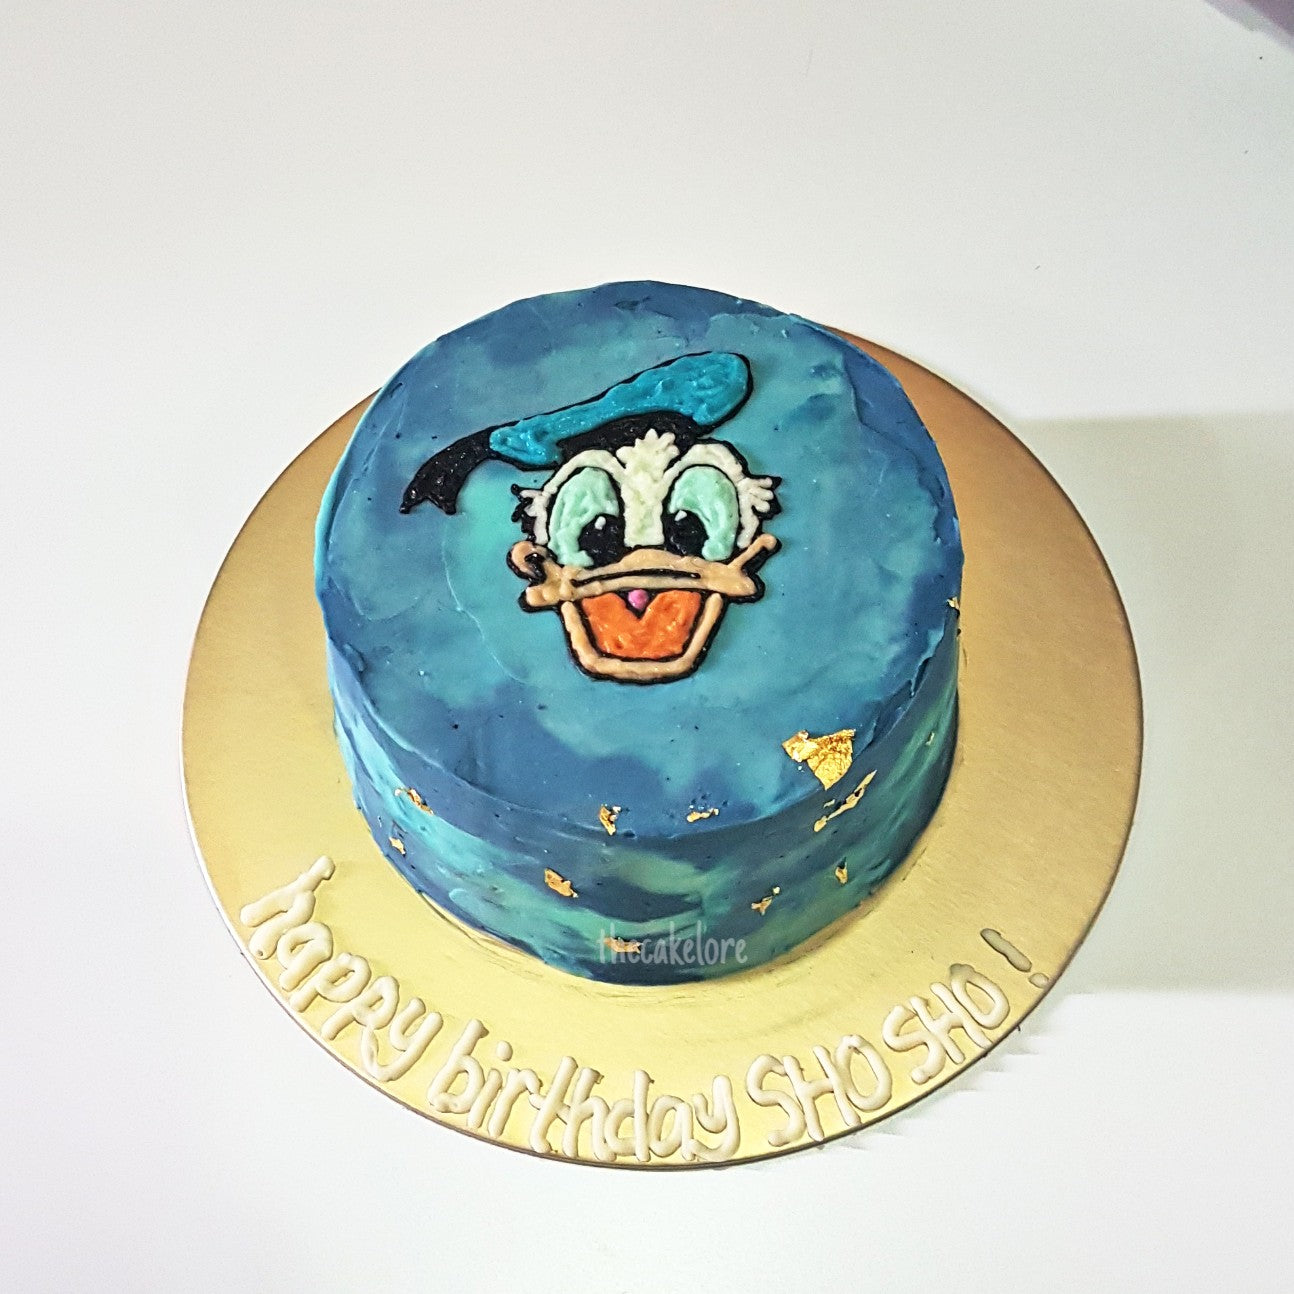 Donald's Pastry Shop, Sector 18, Noida order online - Zomato